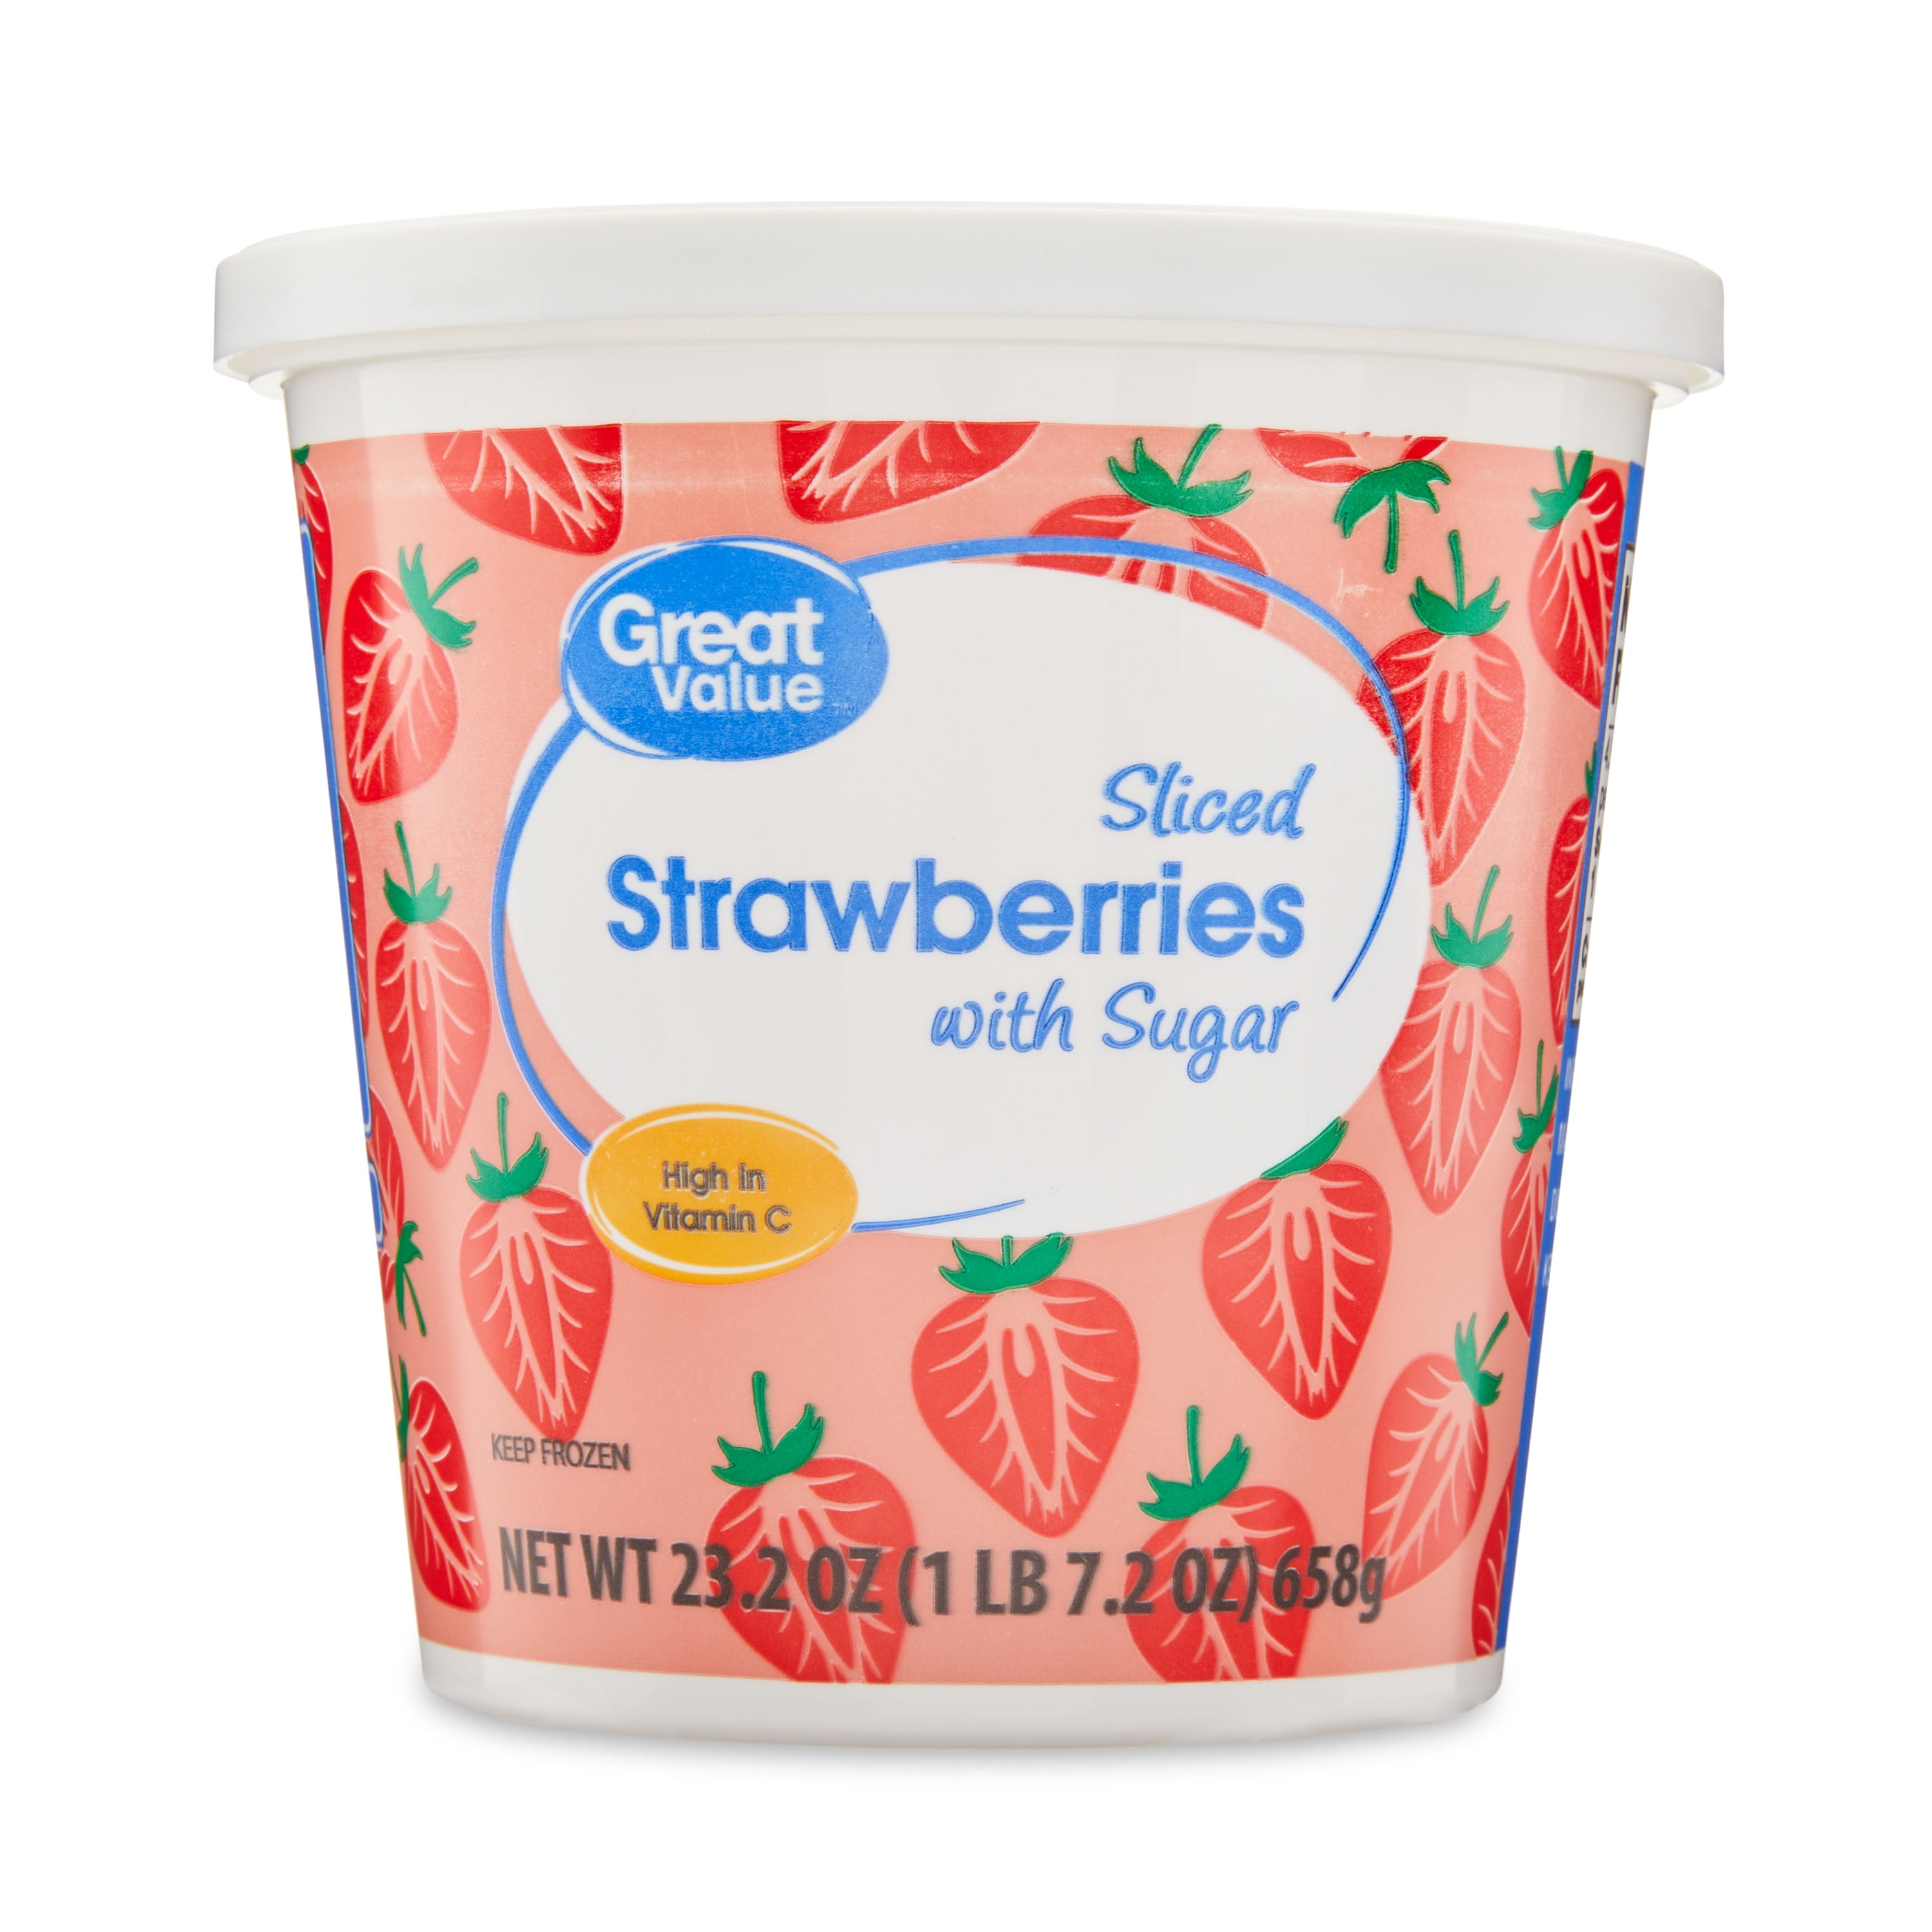 Great Value Sliced Strawberries with Sugar, 23.2 oz (Frozen 